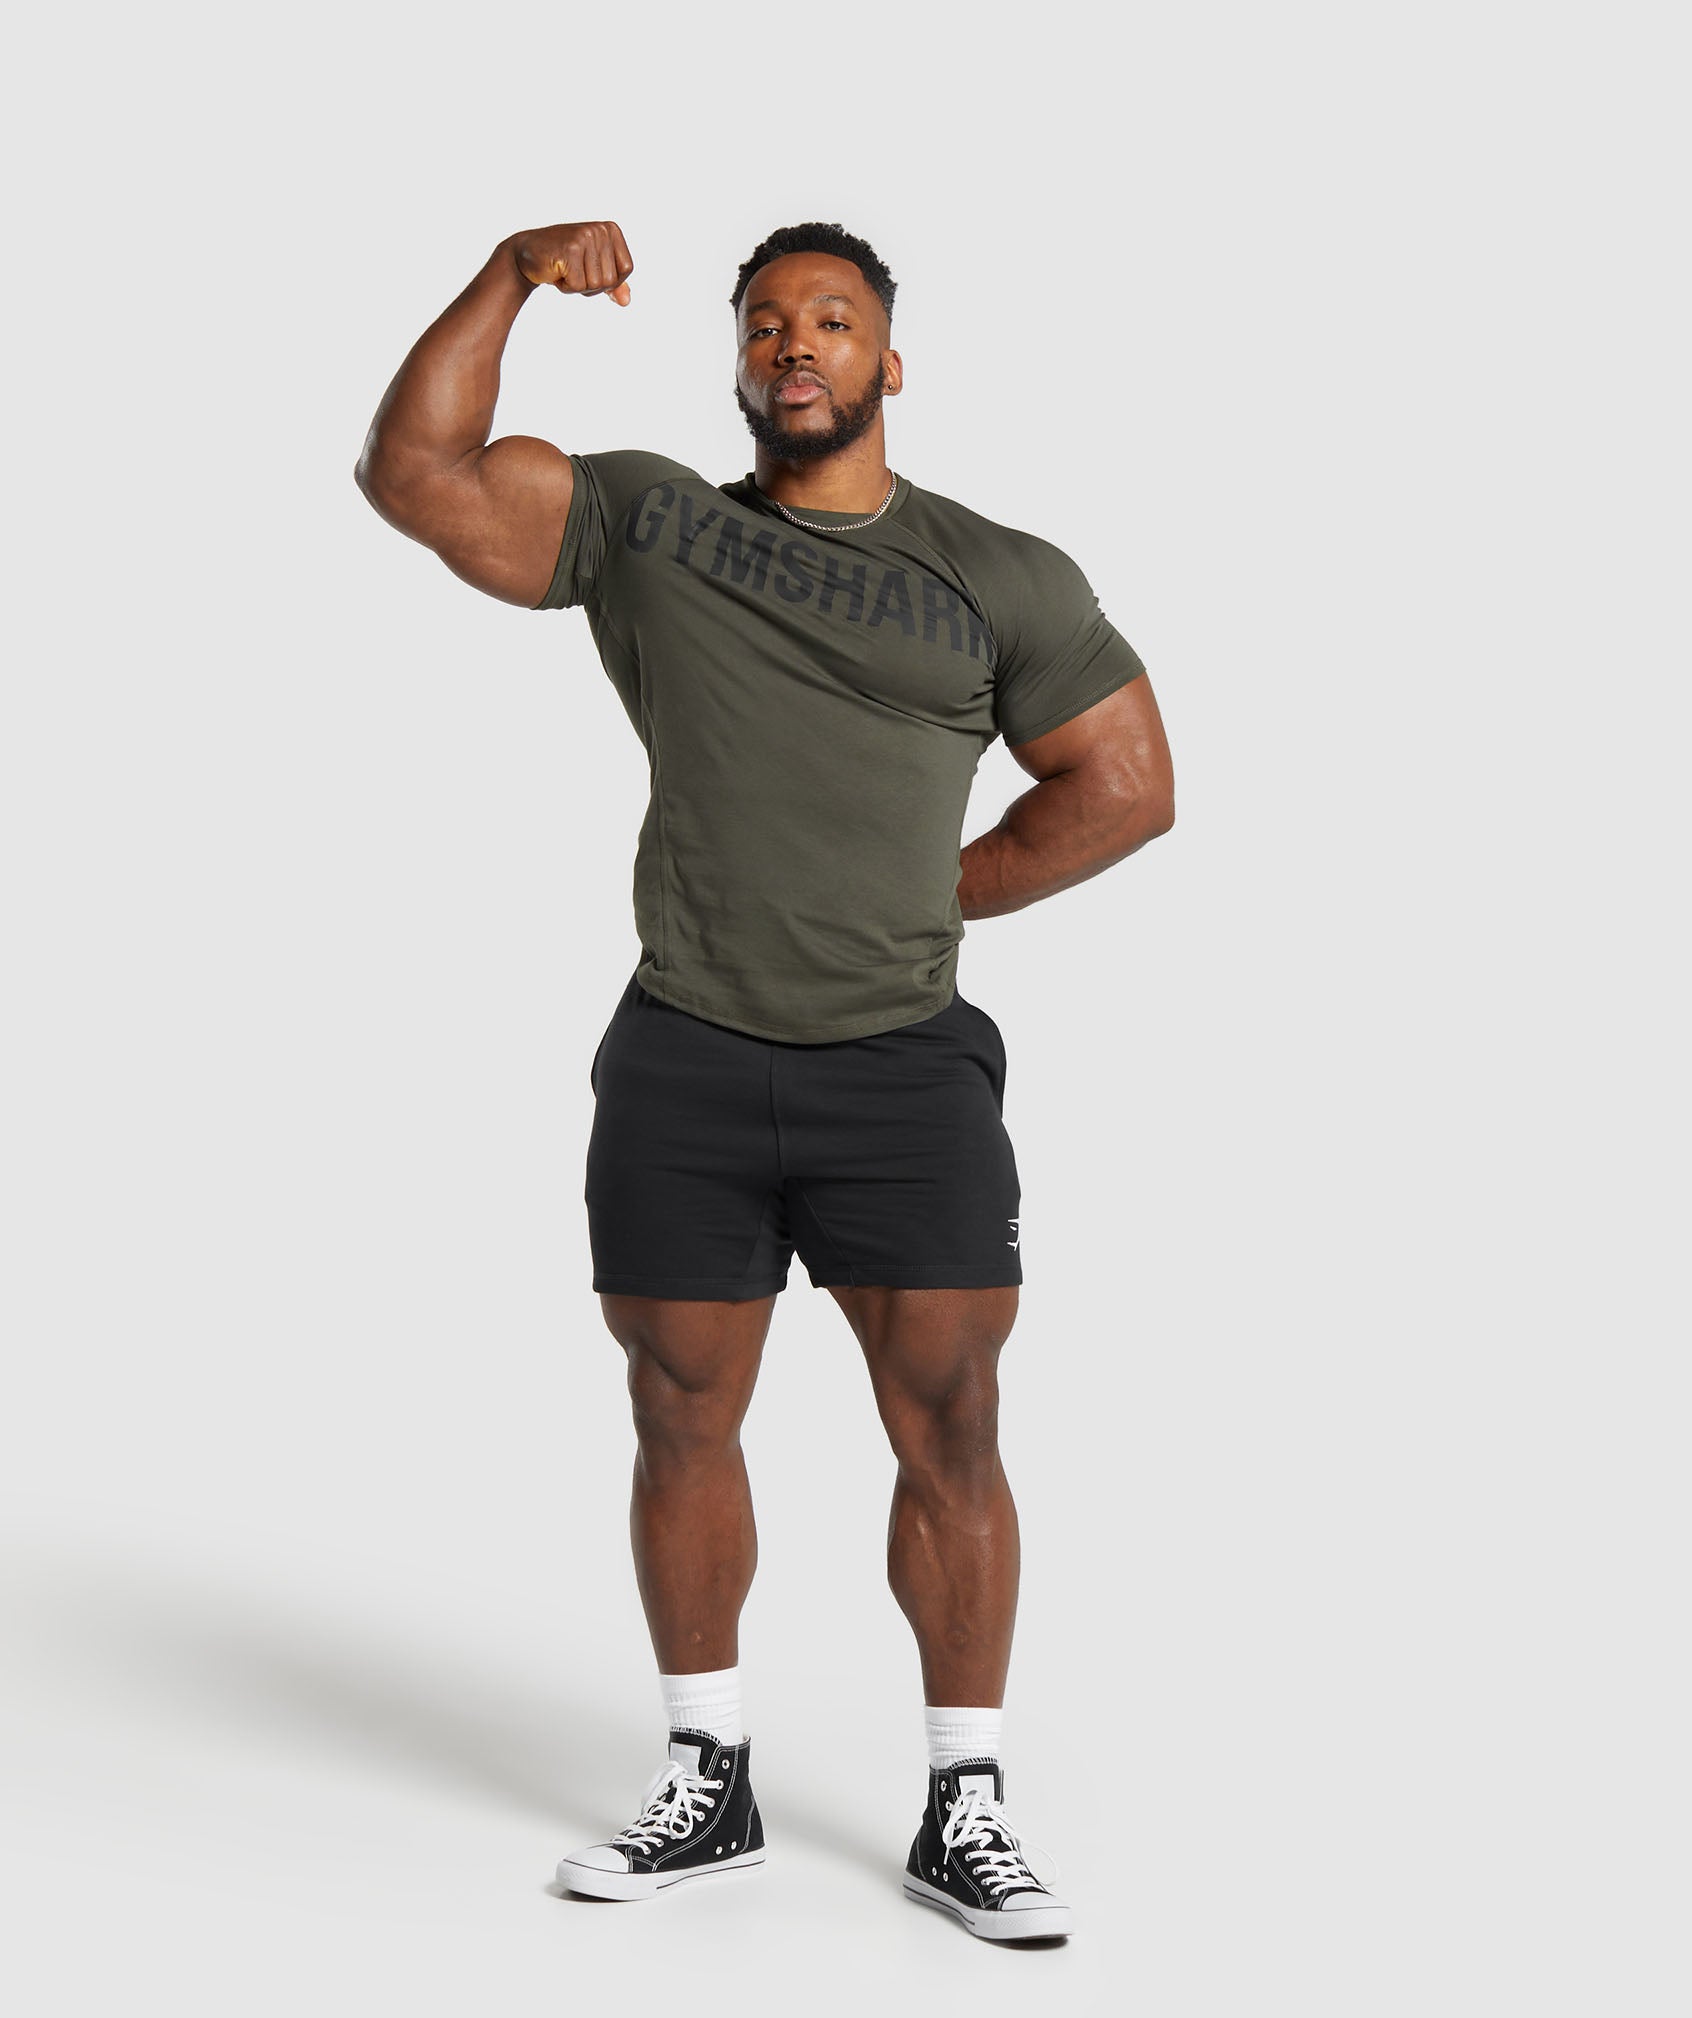 Impact Muscle T-Shirt in Strength Green - view 4